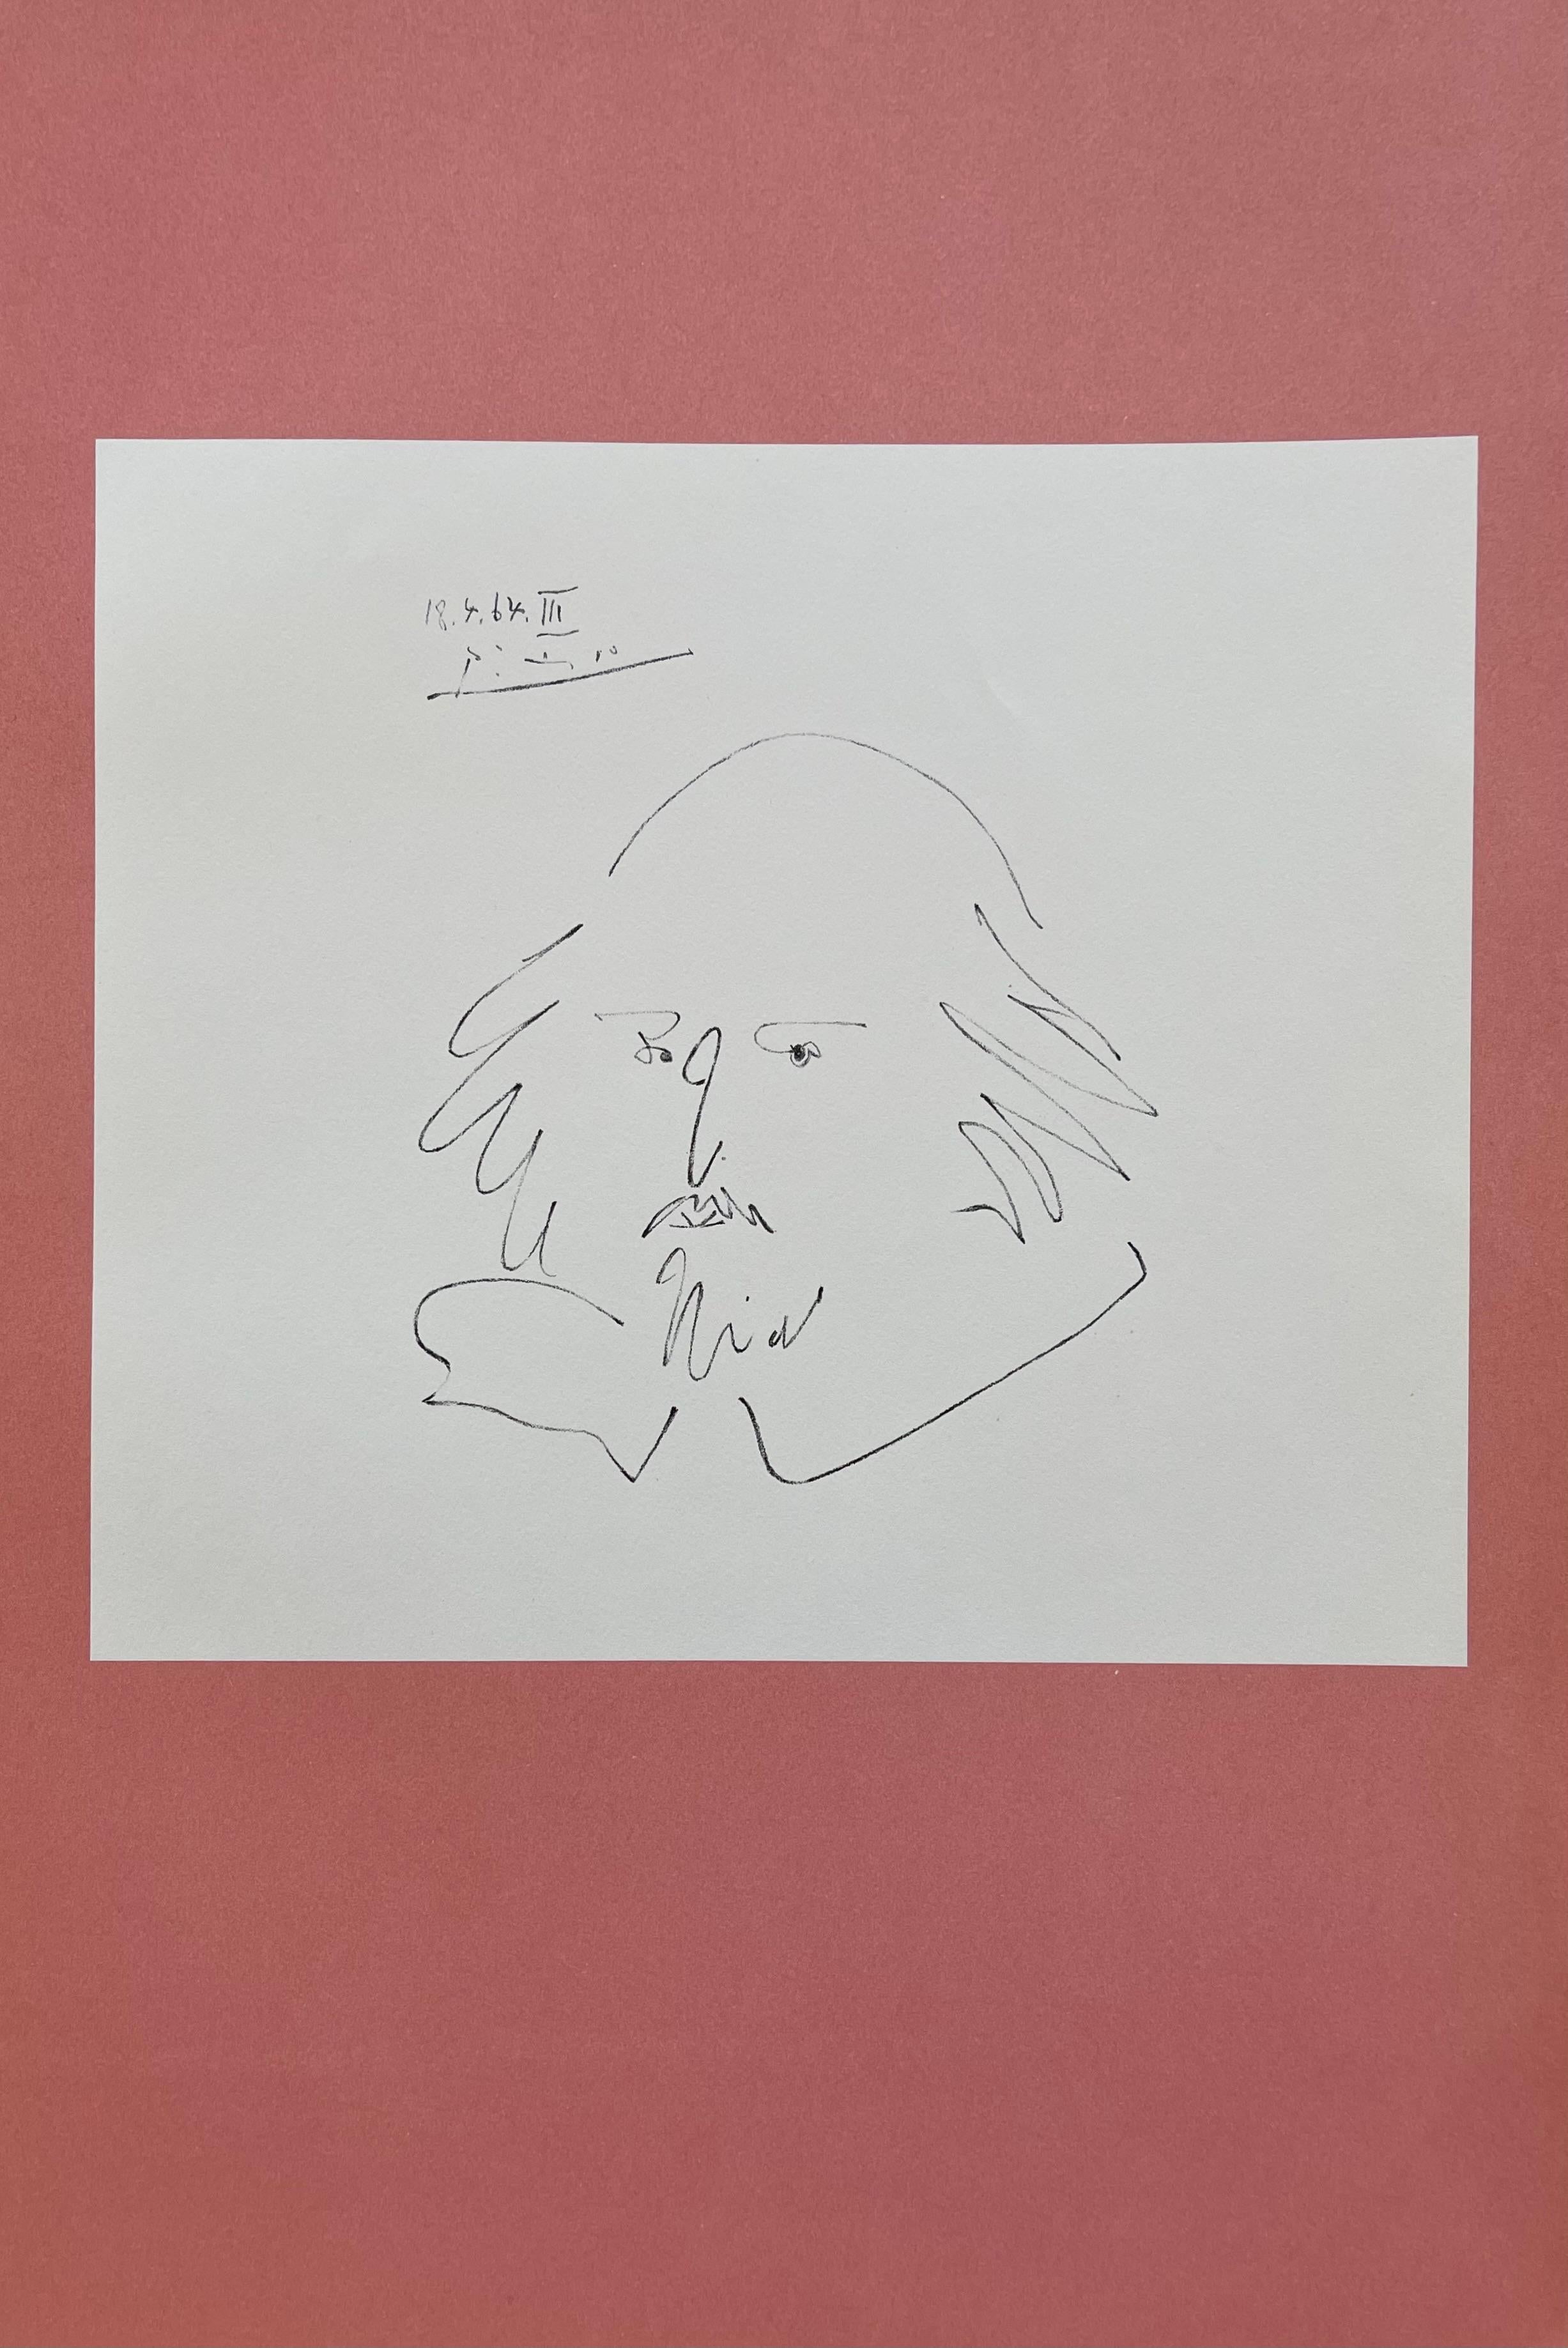 Lithograph on wove paper. Inscription: Unsigned and unnumbered, as issued. Good Condition. Notes: From the volume, Picasso-Aragon Shakespeare, 1965. Published by Harry N. Abrams, Inc., New York; printed by Editions Cercle d'Art, Paris, 1965.

PABLO